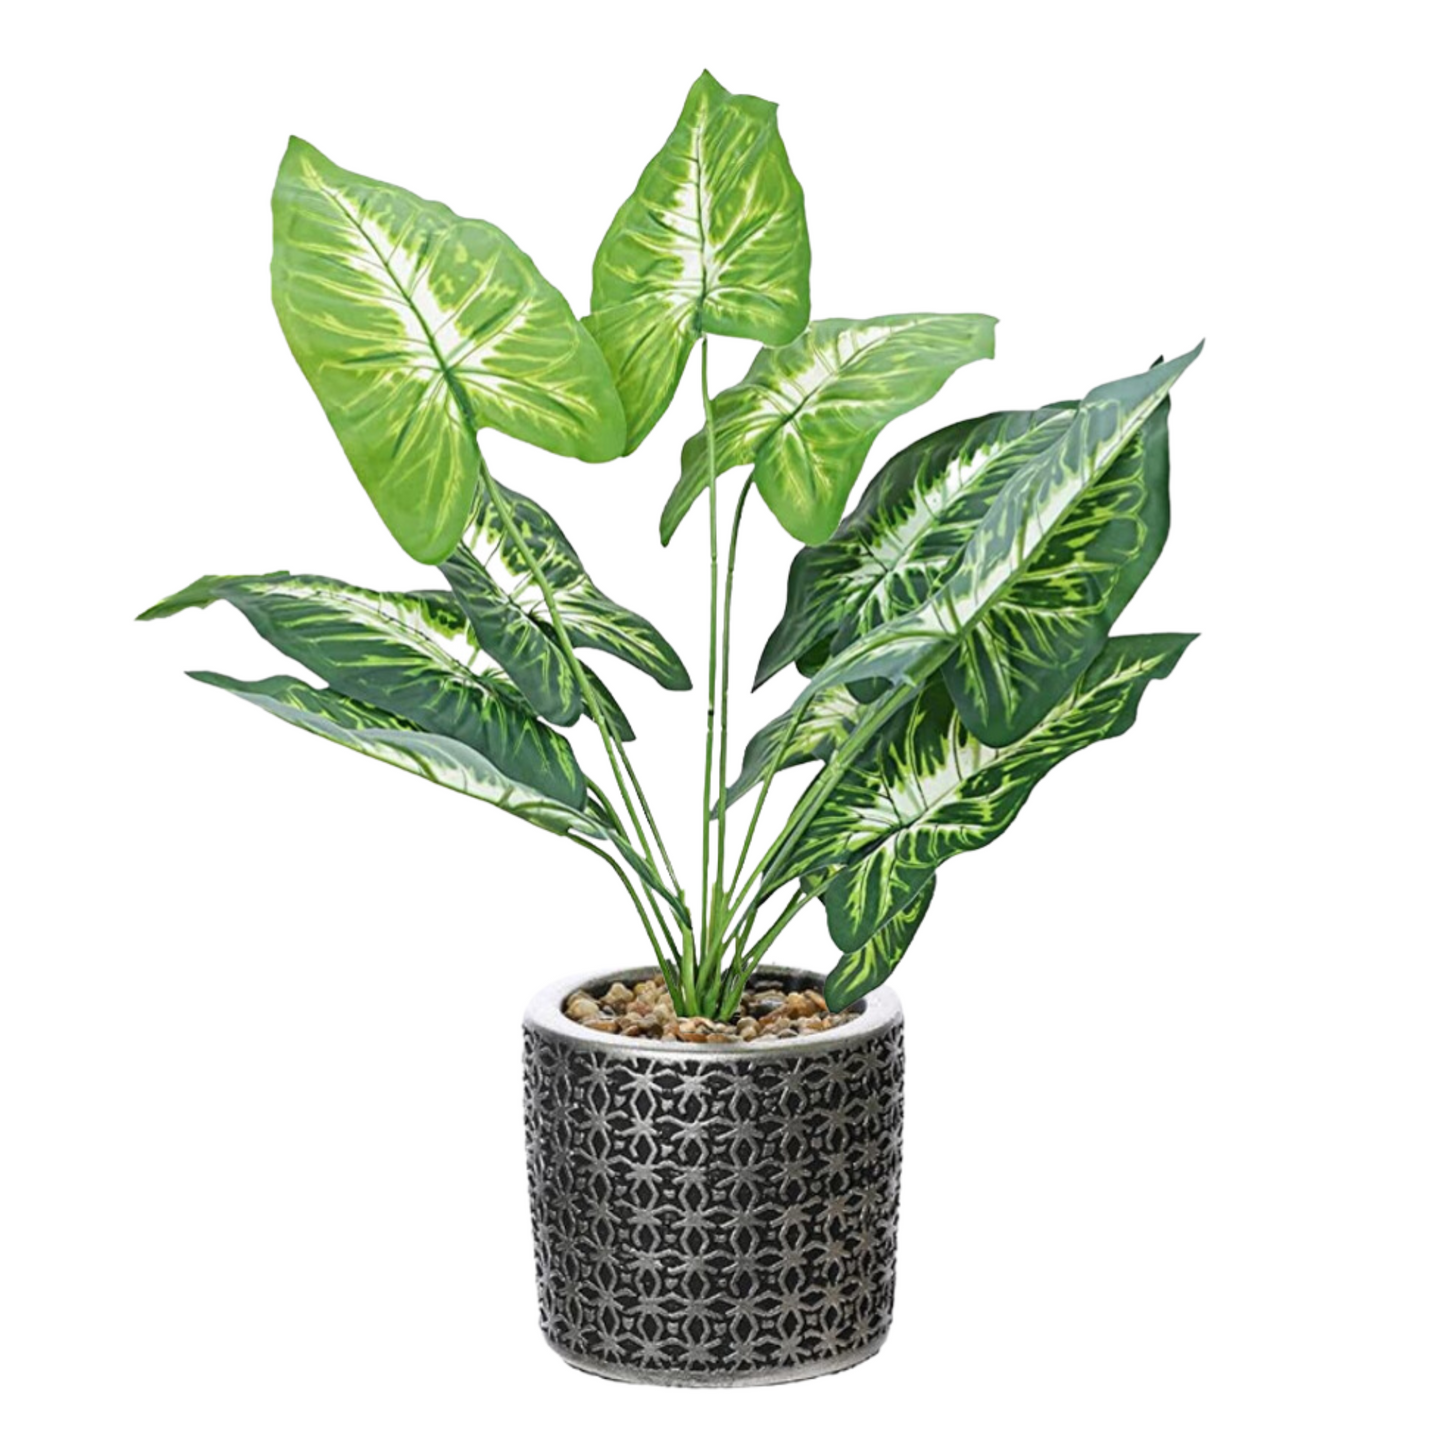 Artificial Small Potted Plant - Patterned Pot (43 cm)